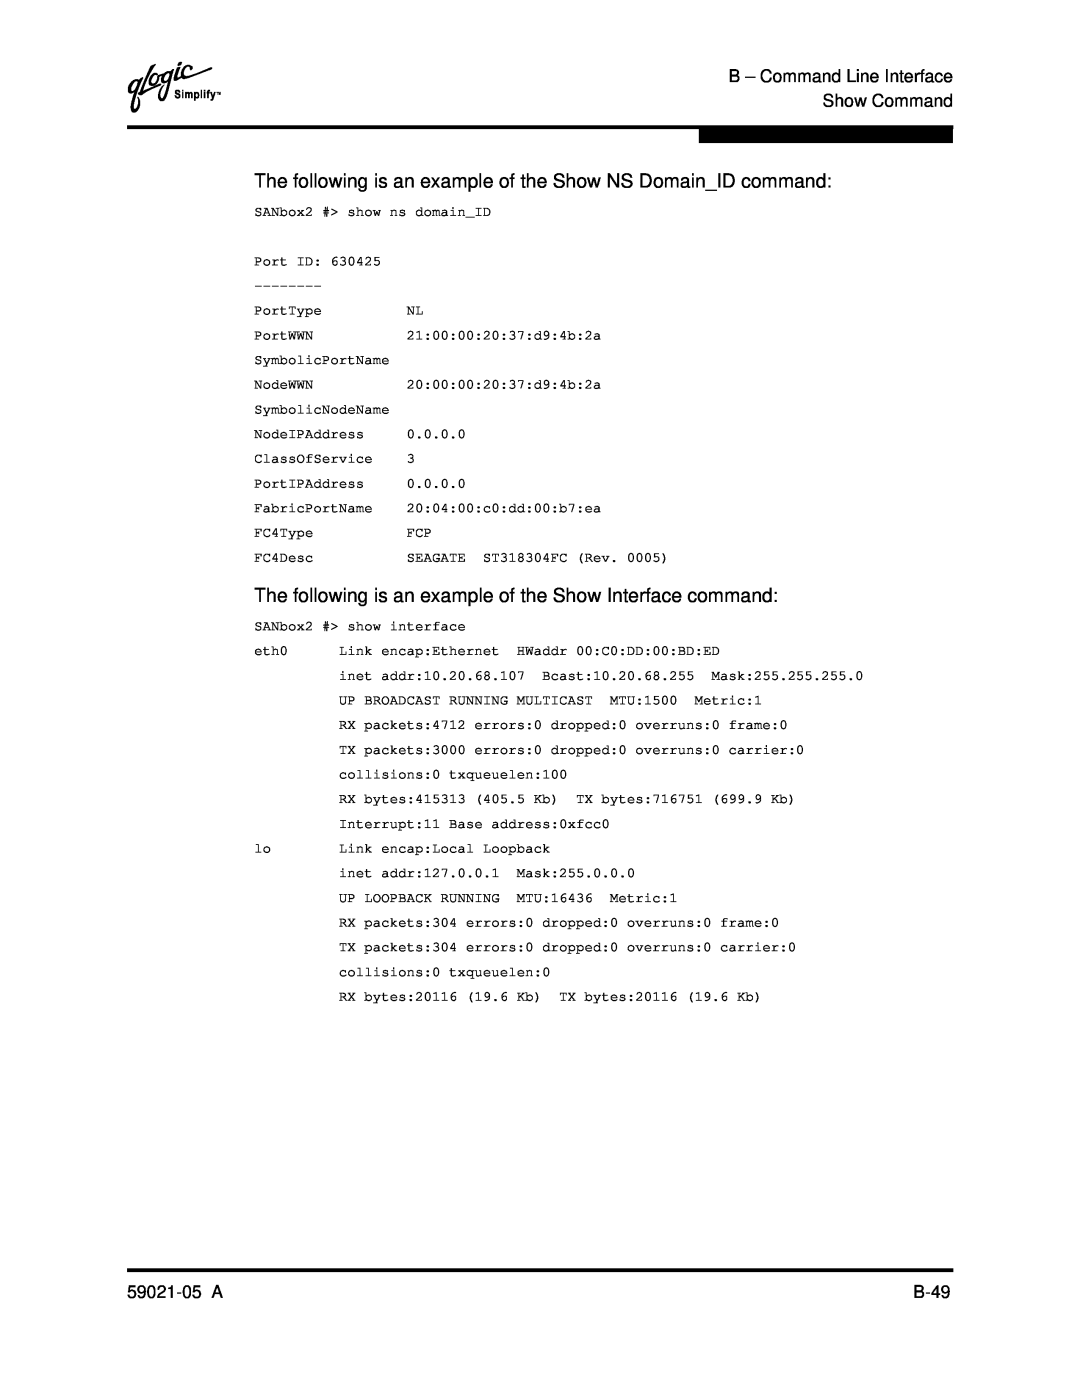 Q-Logic 59021-05 manual The following is an example of the Show NS DomainID command 